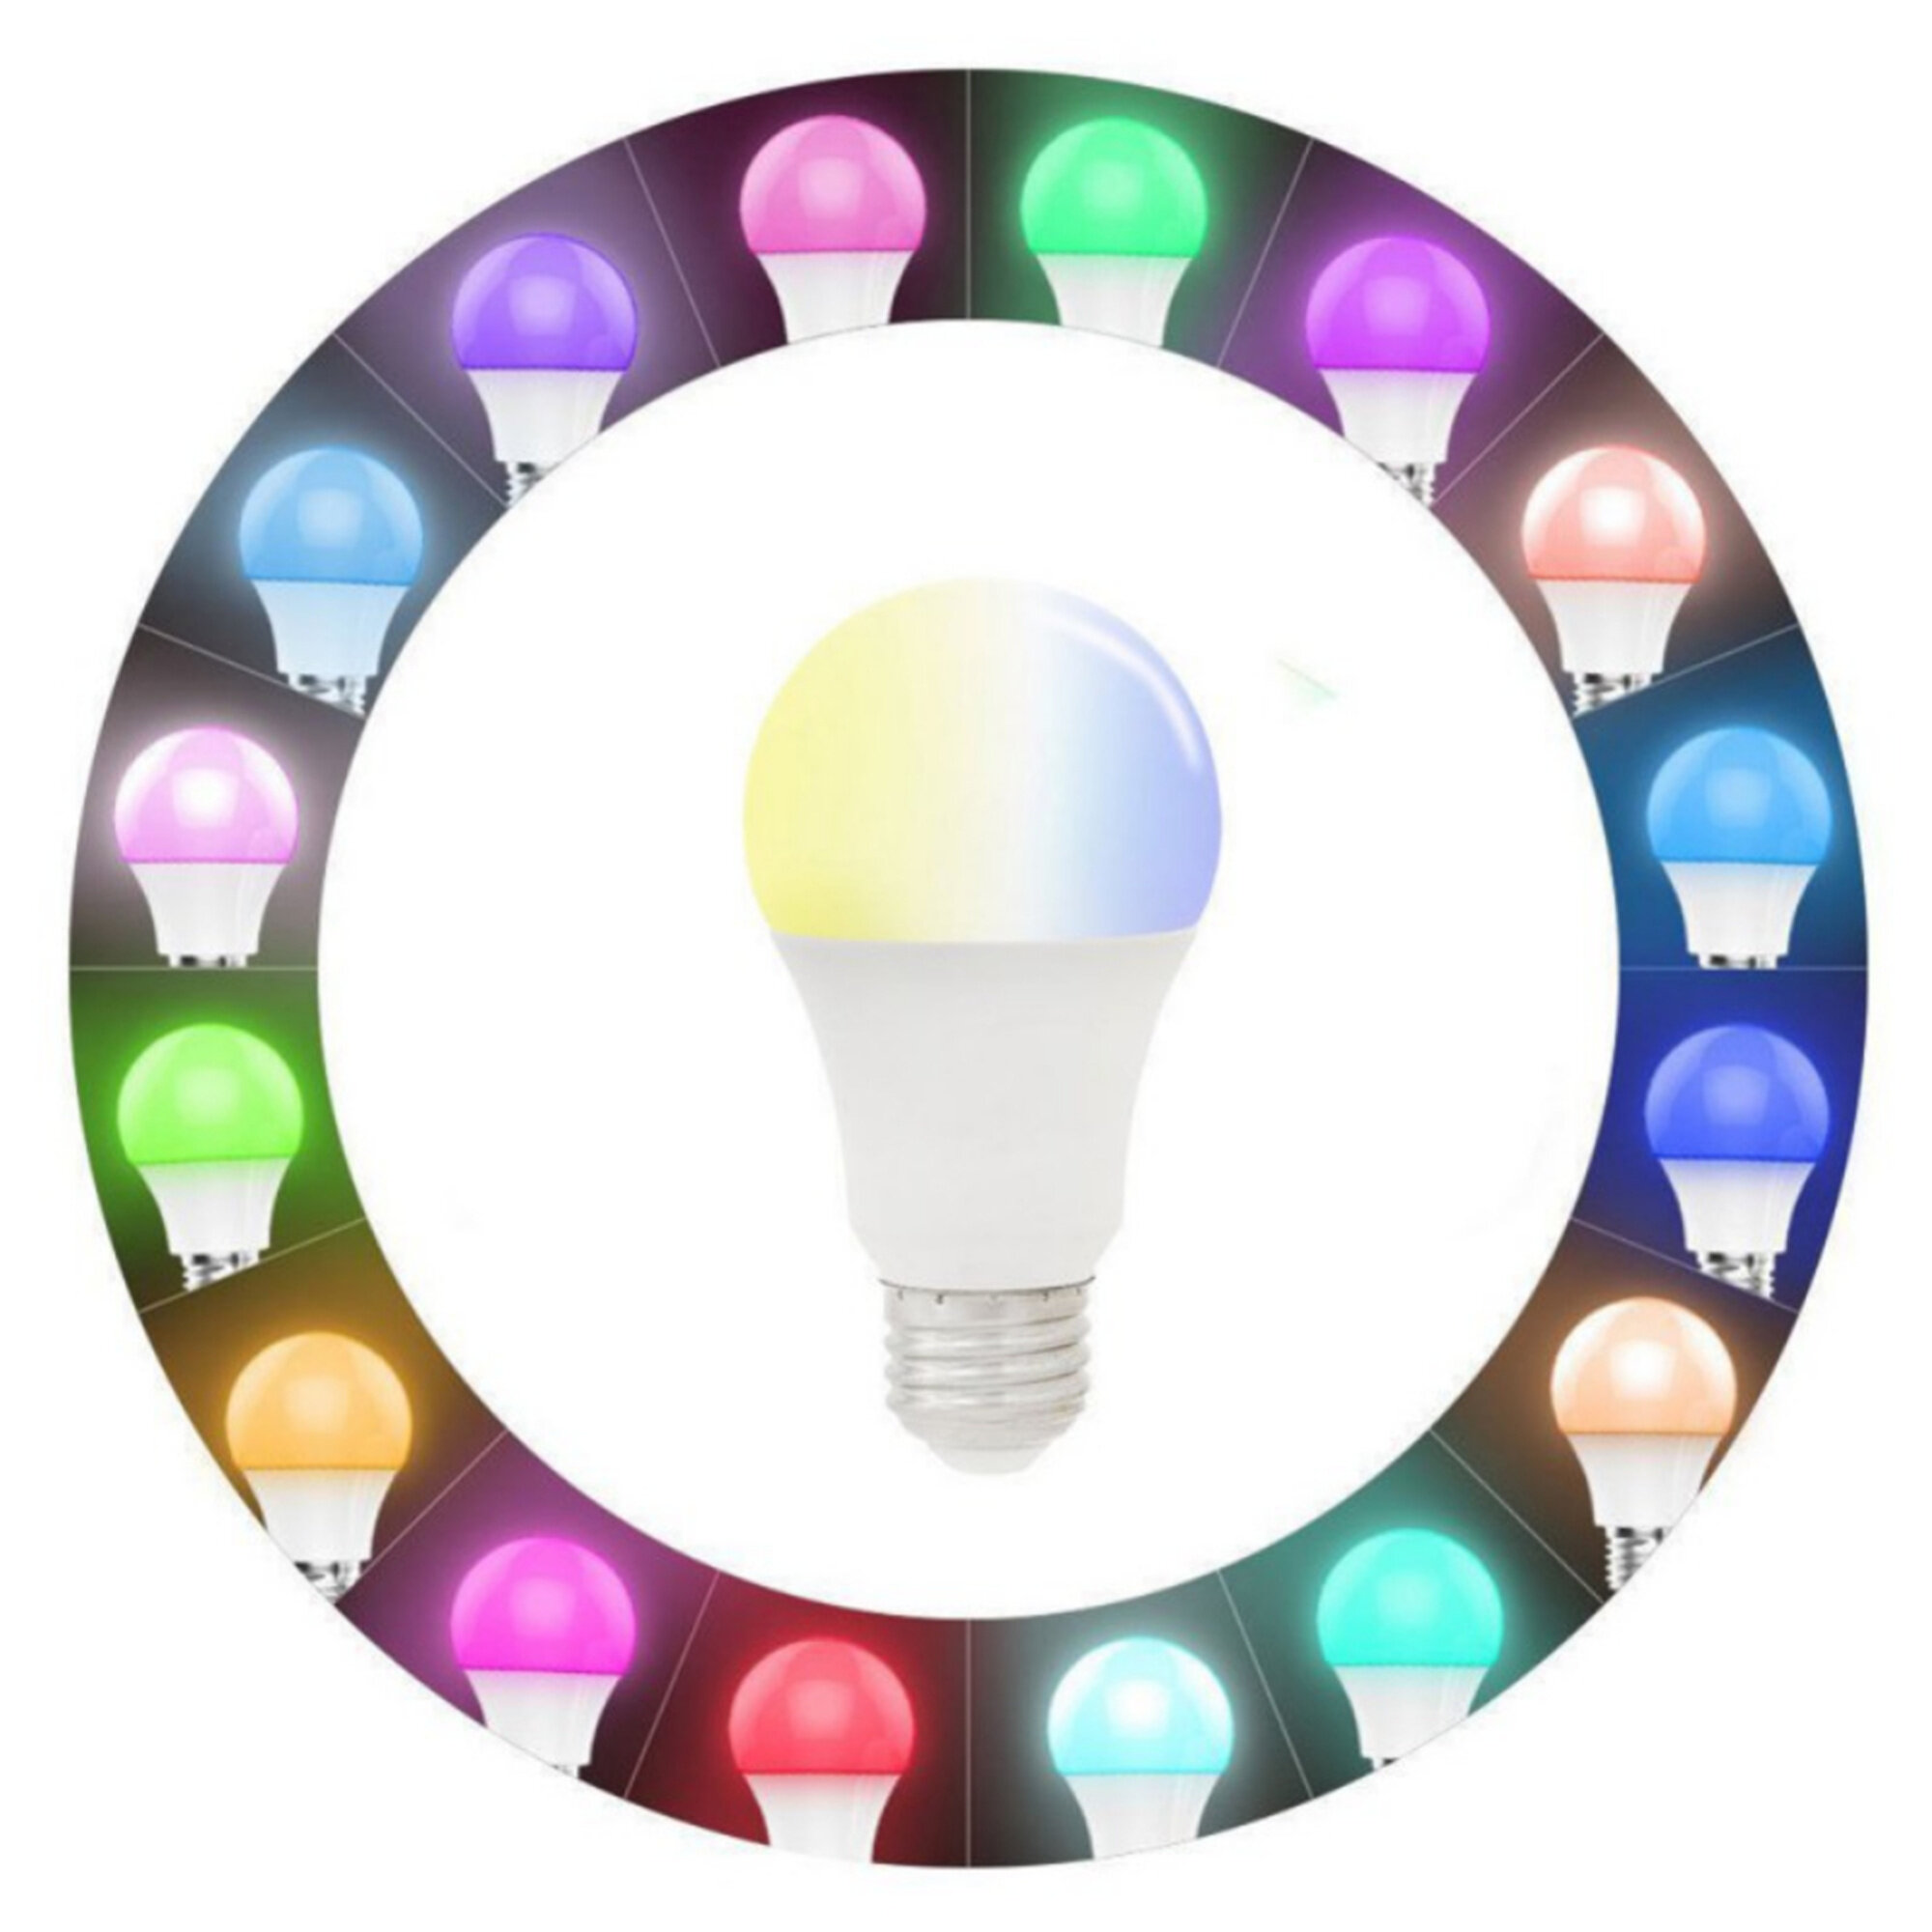 Smart LED Bulb & Socket Home Starter Kit I Easy to Install with Wifi Internet Connection I Free App Download for Smart Phone Control I Compatible with Alexa and Google Assistant for Voice Control 